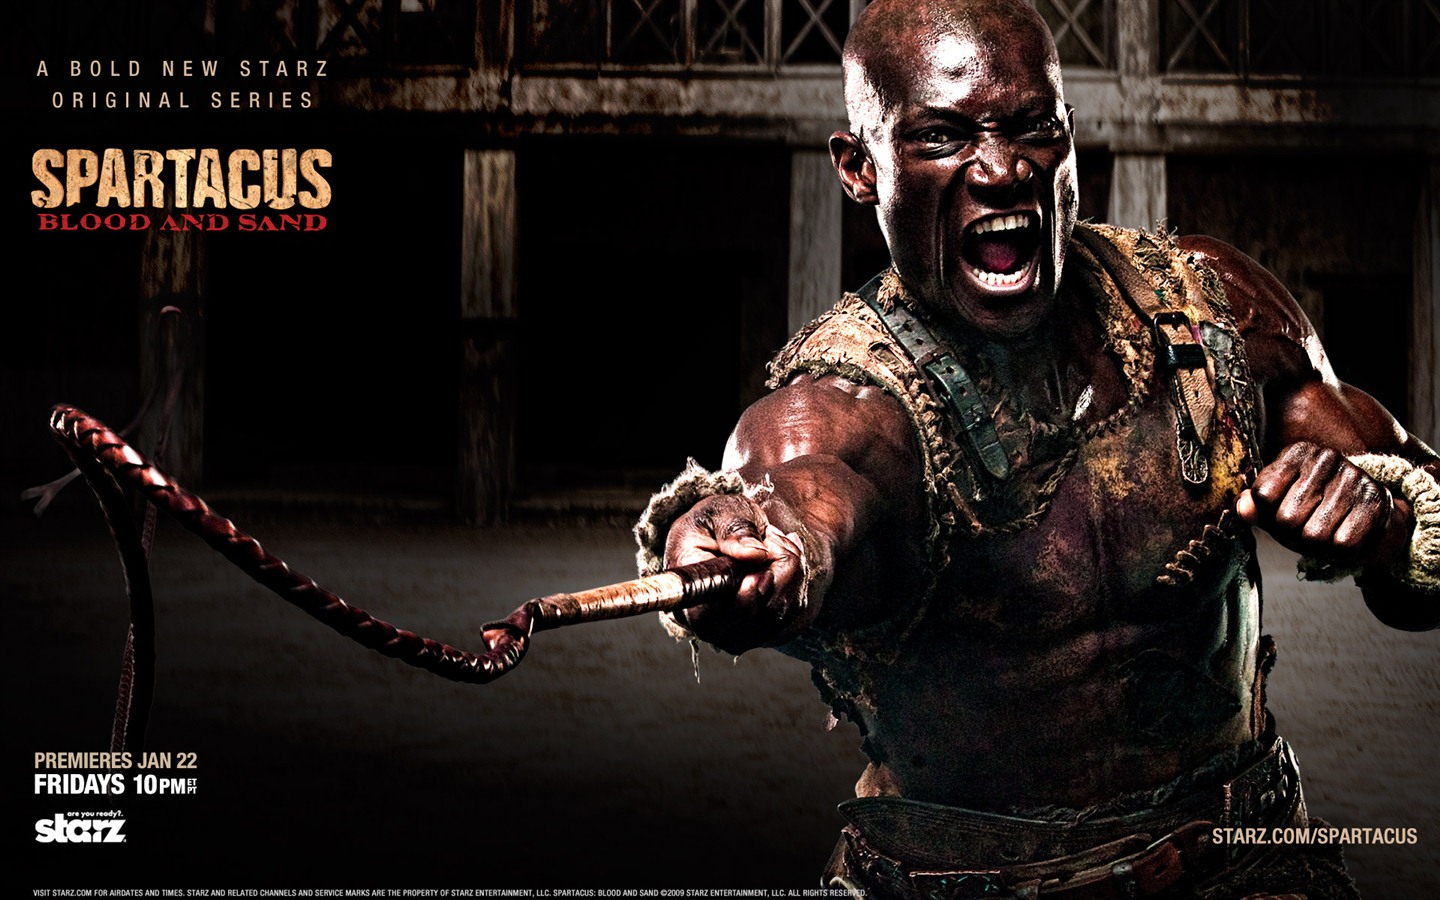 Spartacus: Blood and Sand HD wallpapers #5 - 1440x900